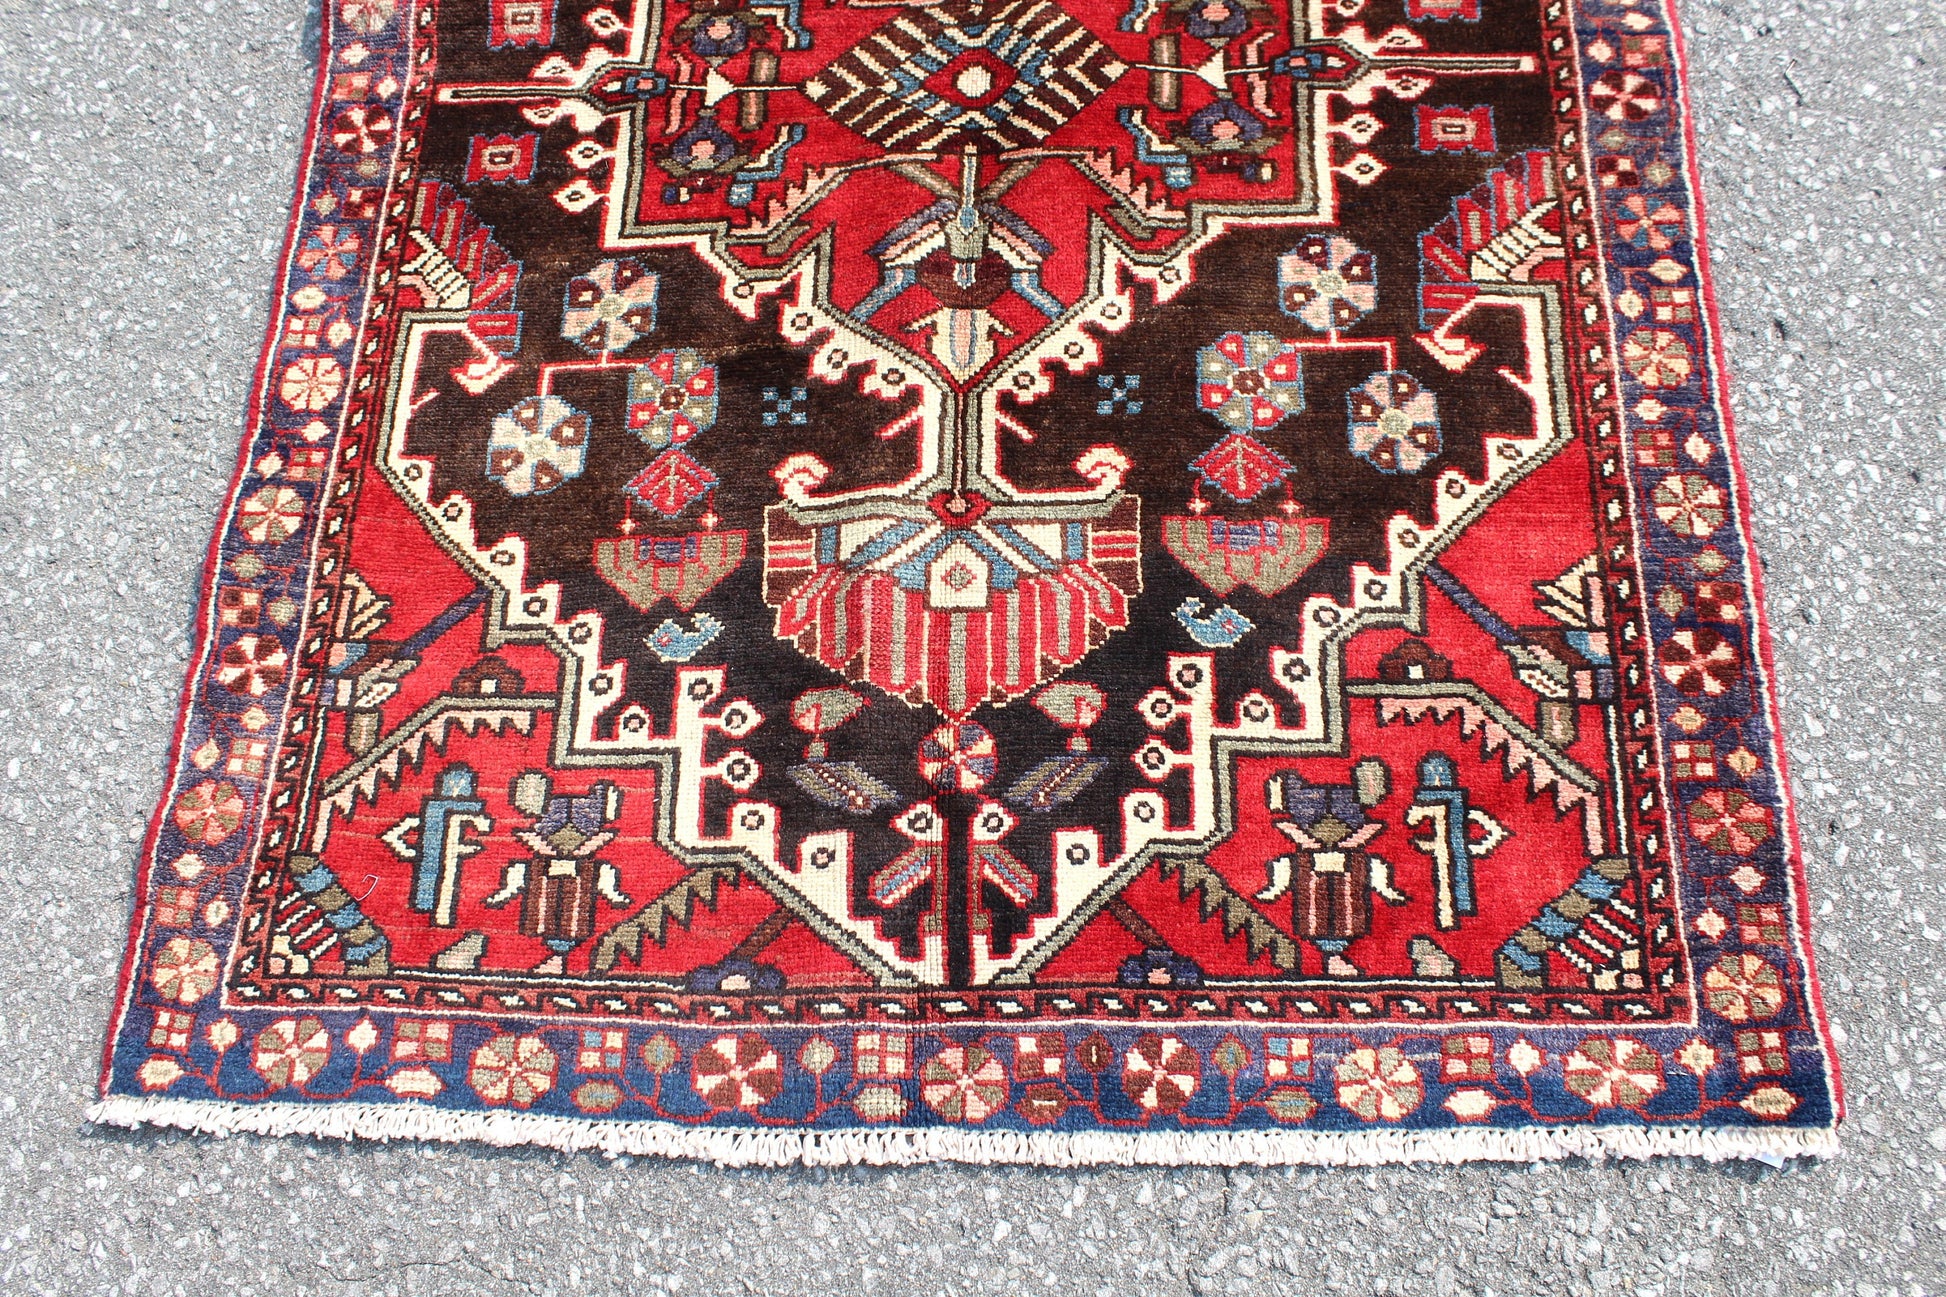 Vintage Red Rug 3'6" x 5'1" with Brown Background Blue Border